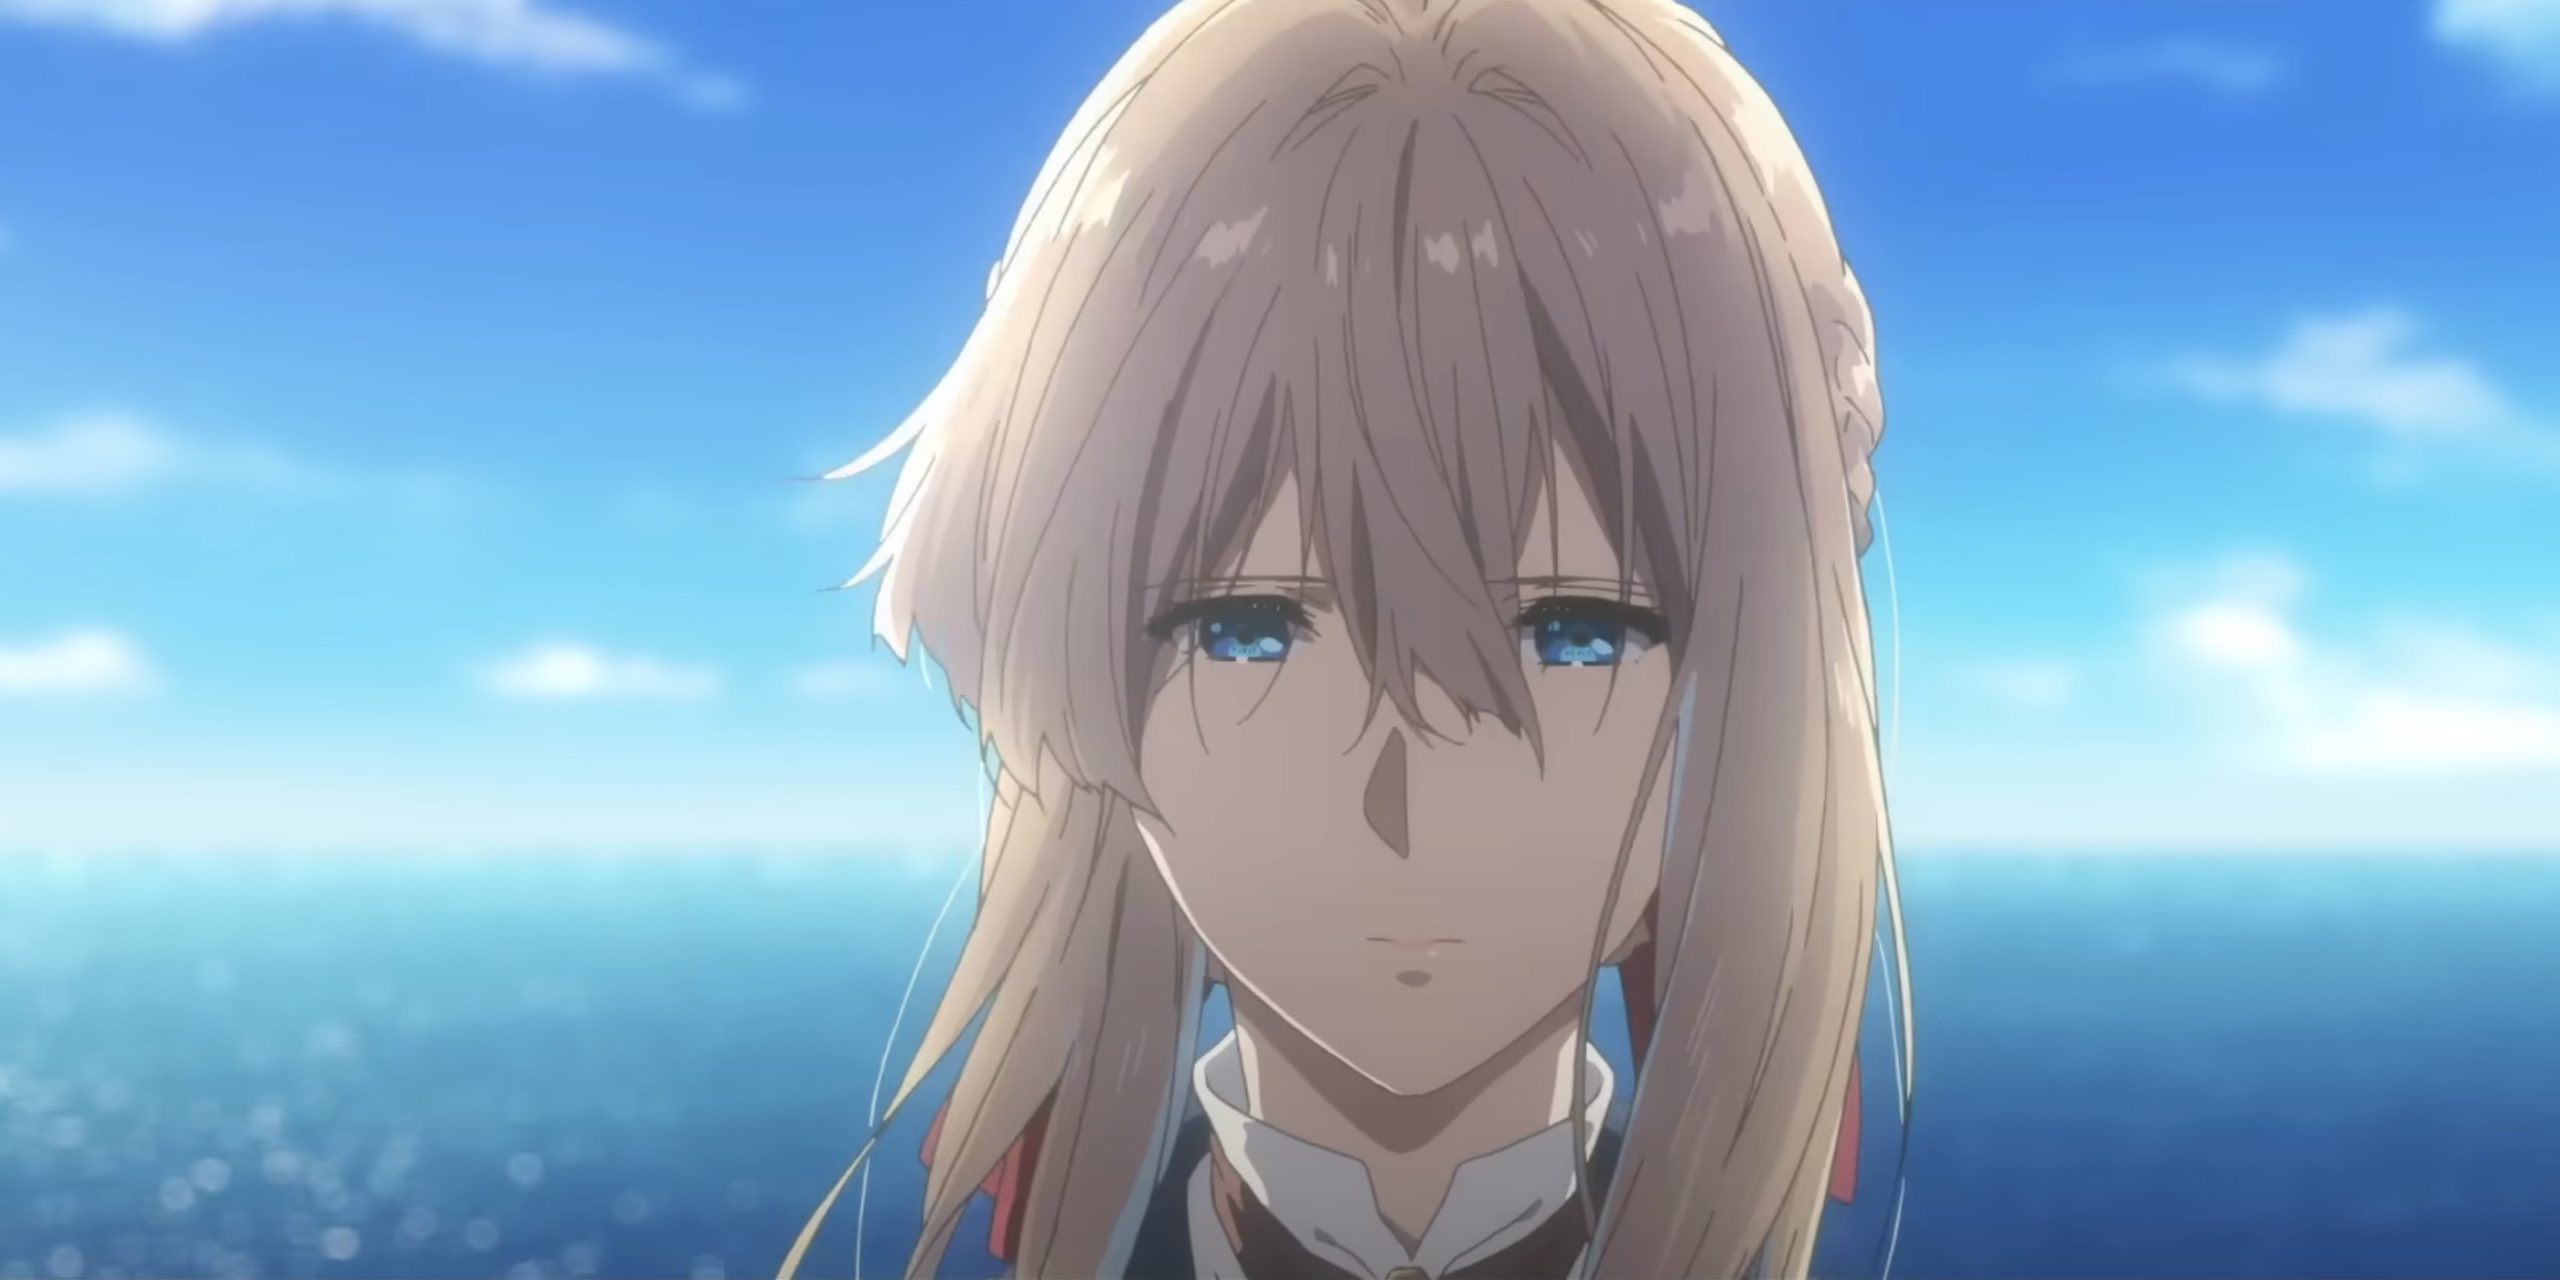 Why is Violet Evergarden Anime So Controversial